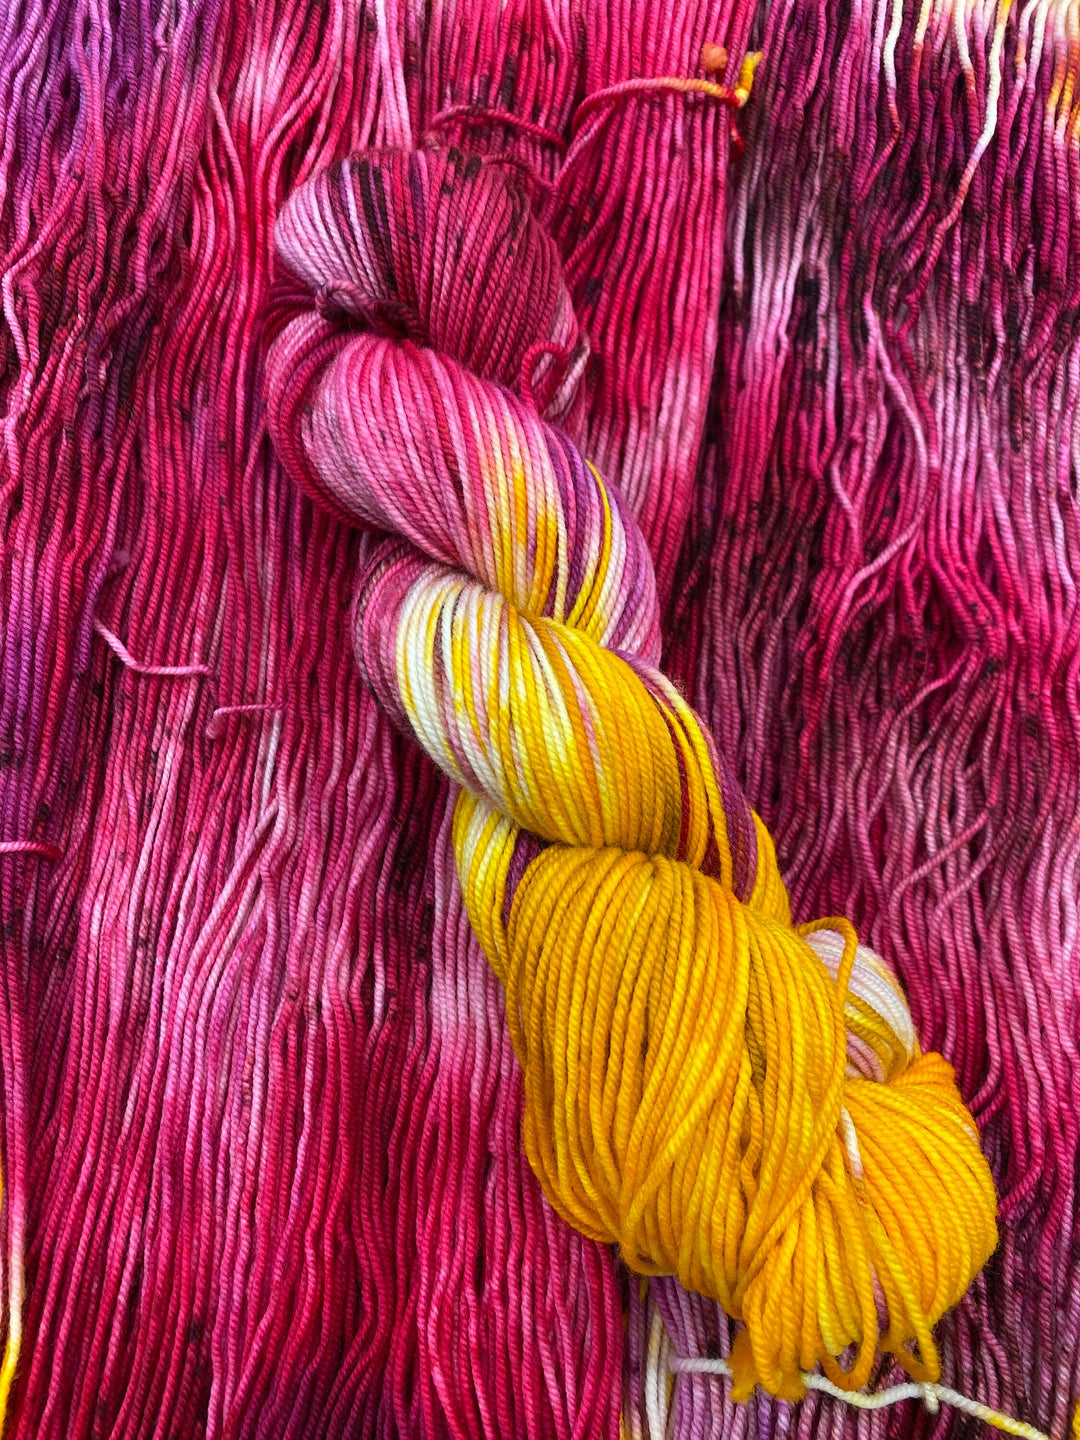 Passionate Fruit- Hand dyed yarn - Mohair - Fingering - Sock - DK - Sport - Worsted - Bulky - Variegated yarn